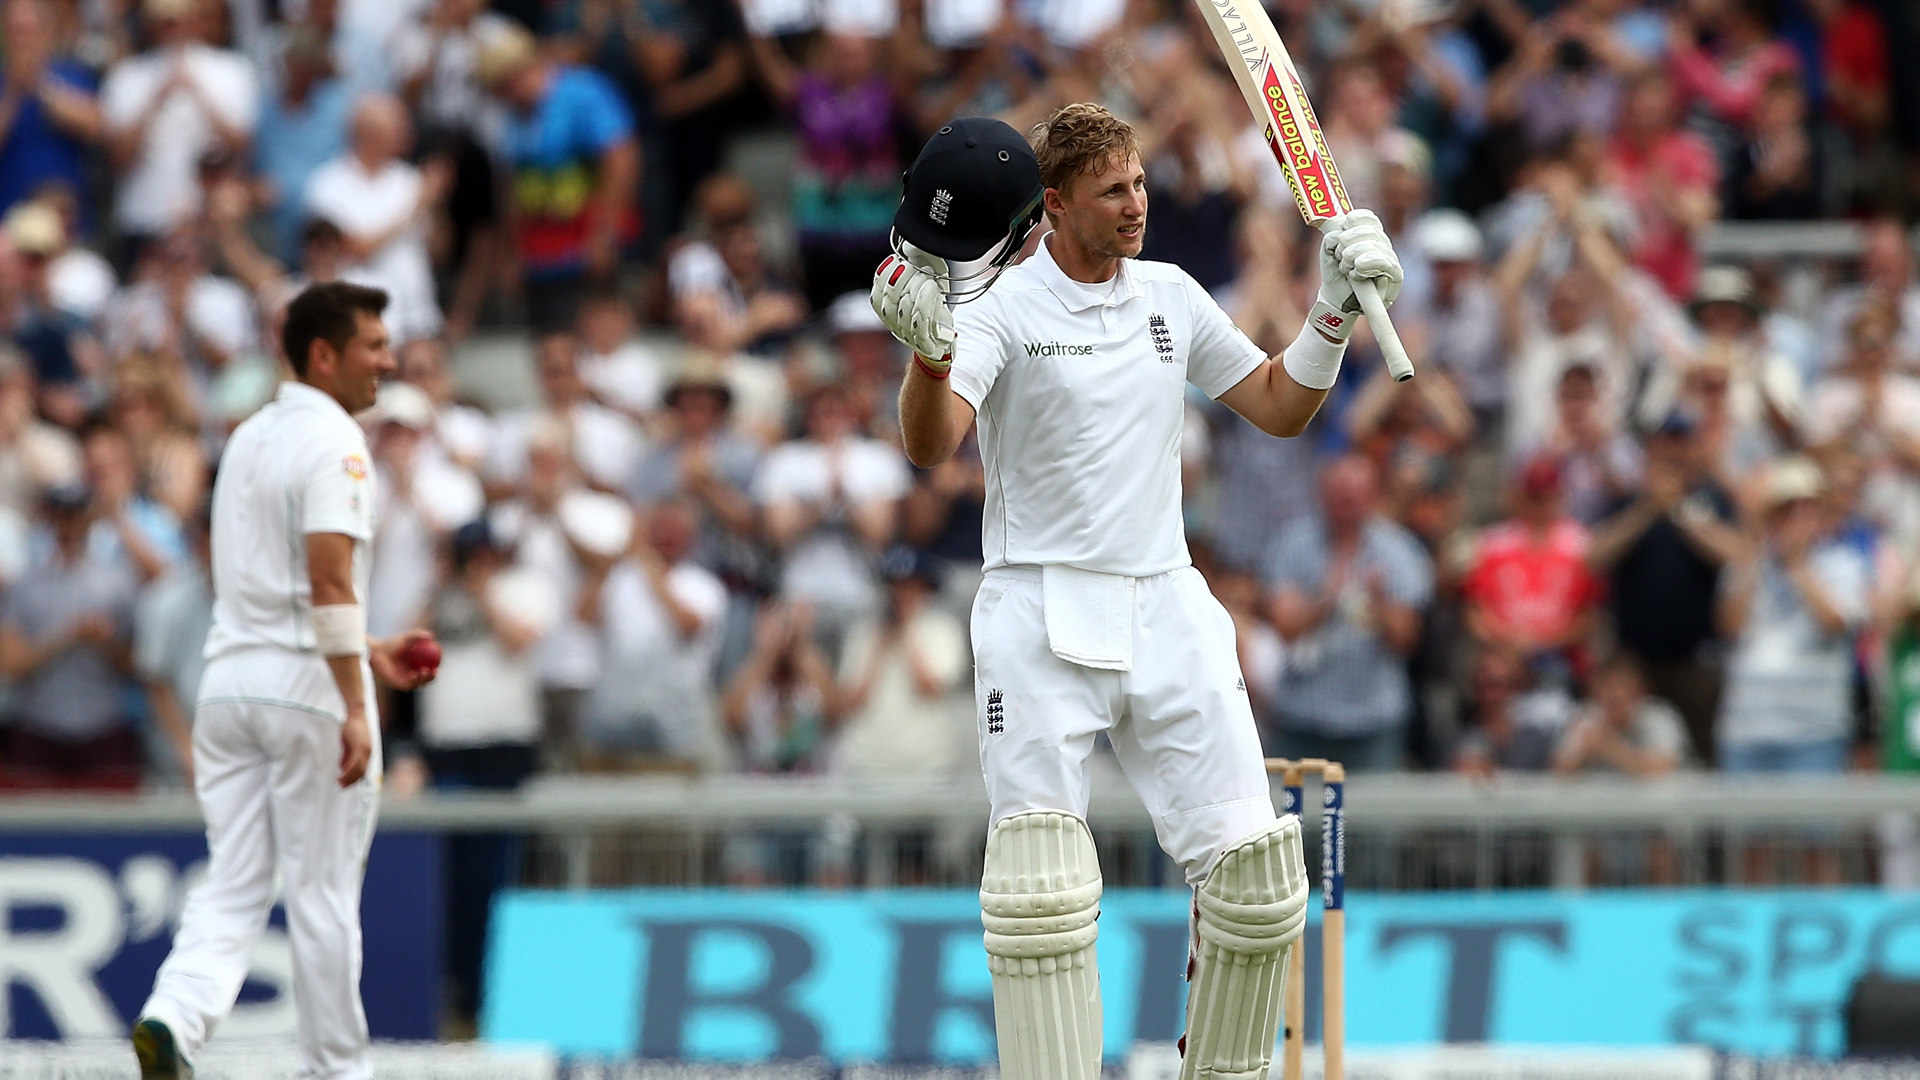 Nasser Hussain terms Root's double ton as one of the greatest